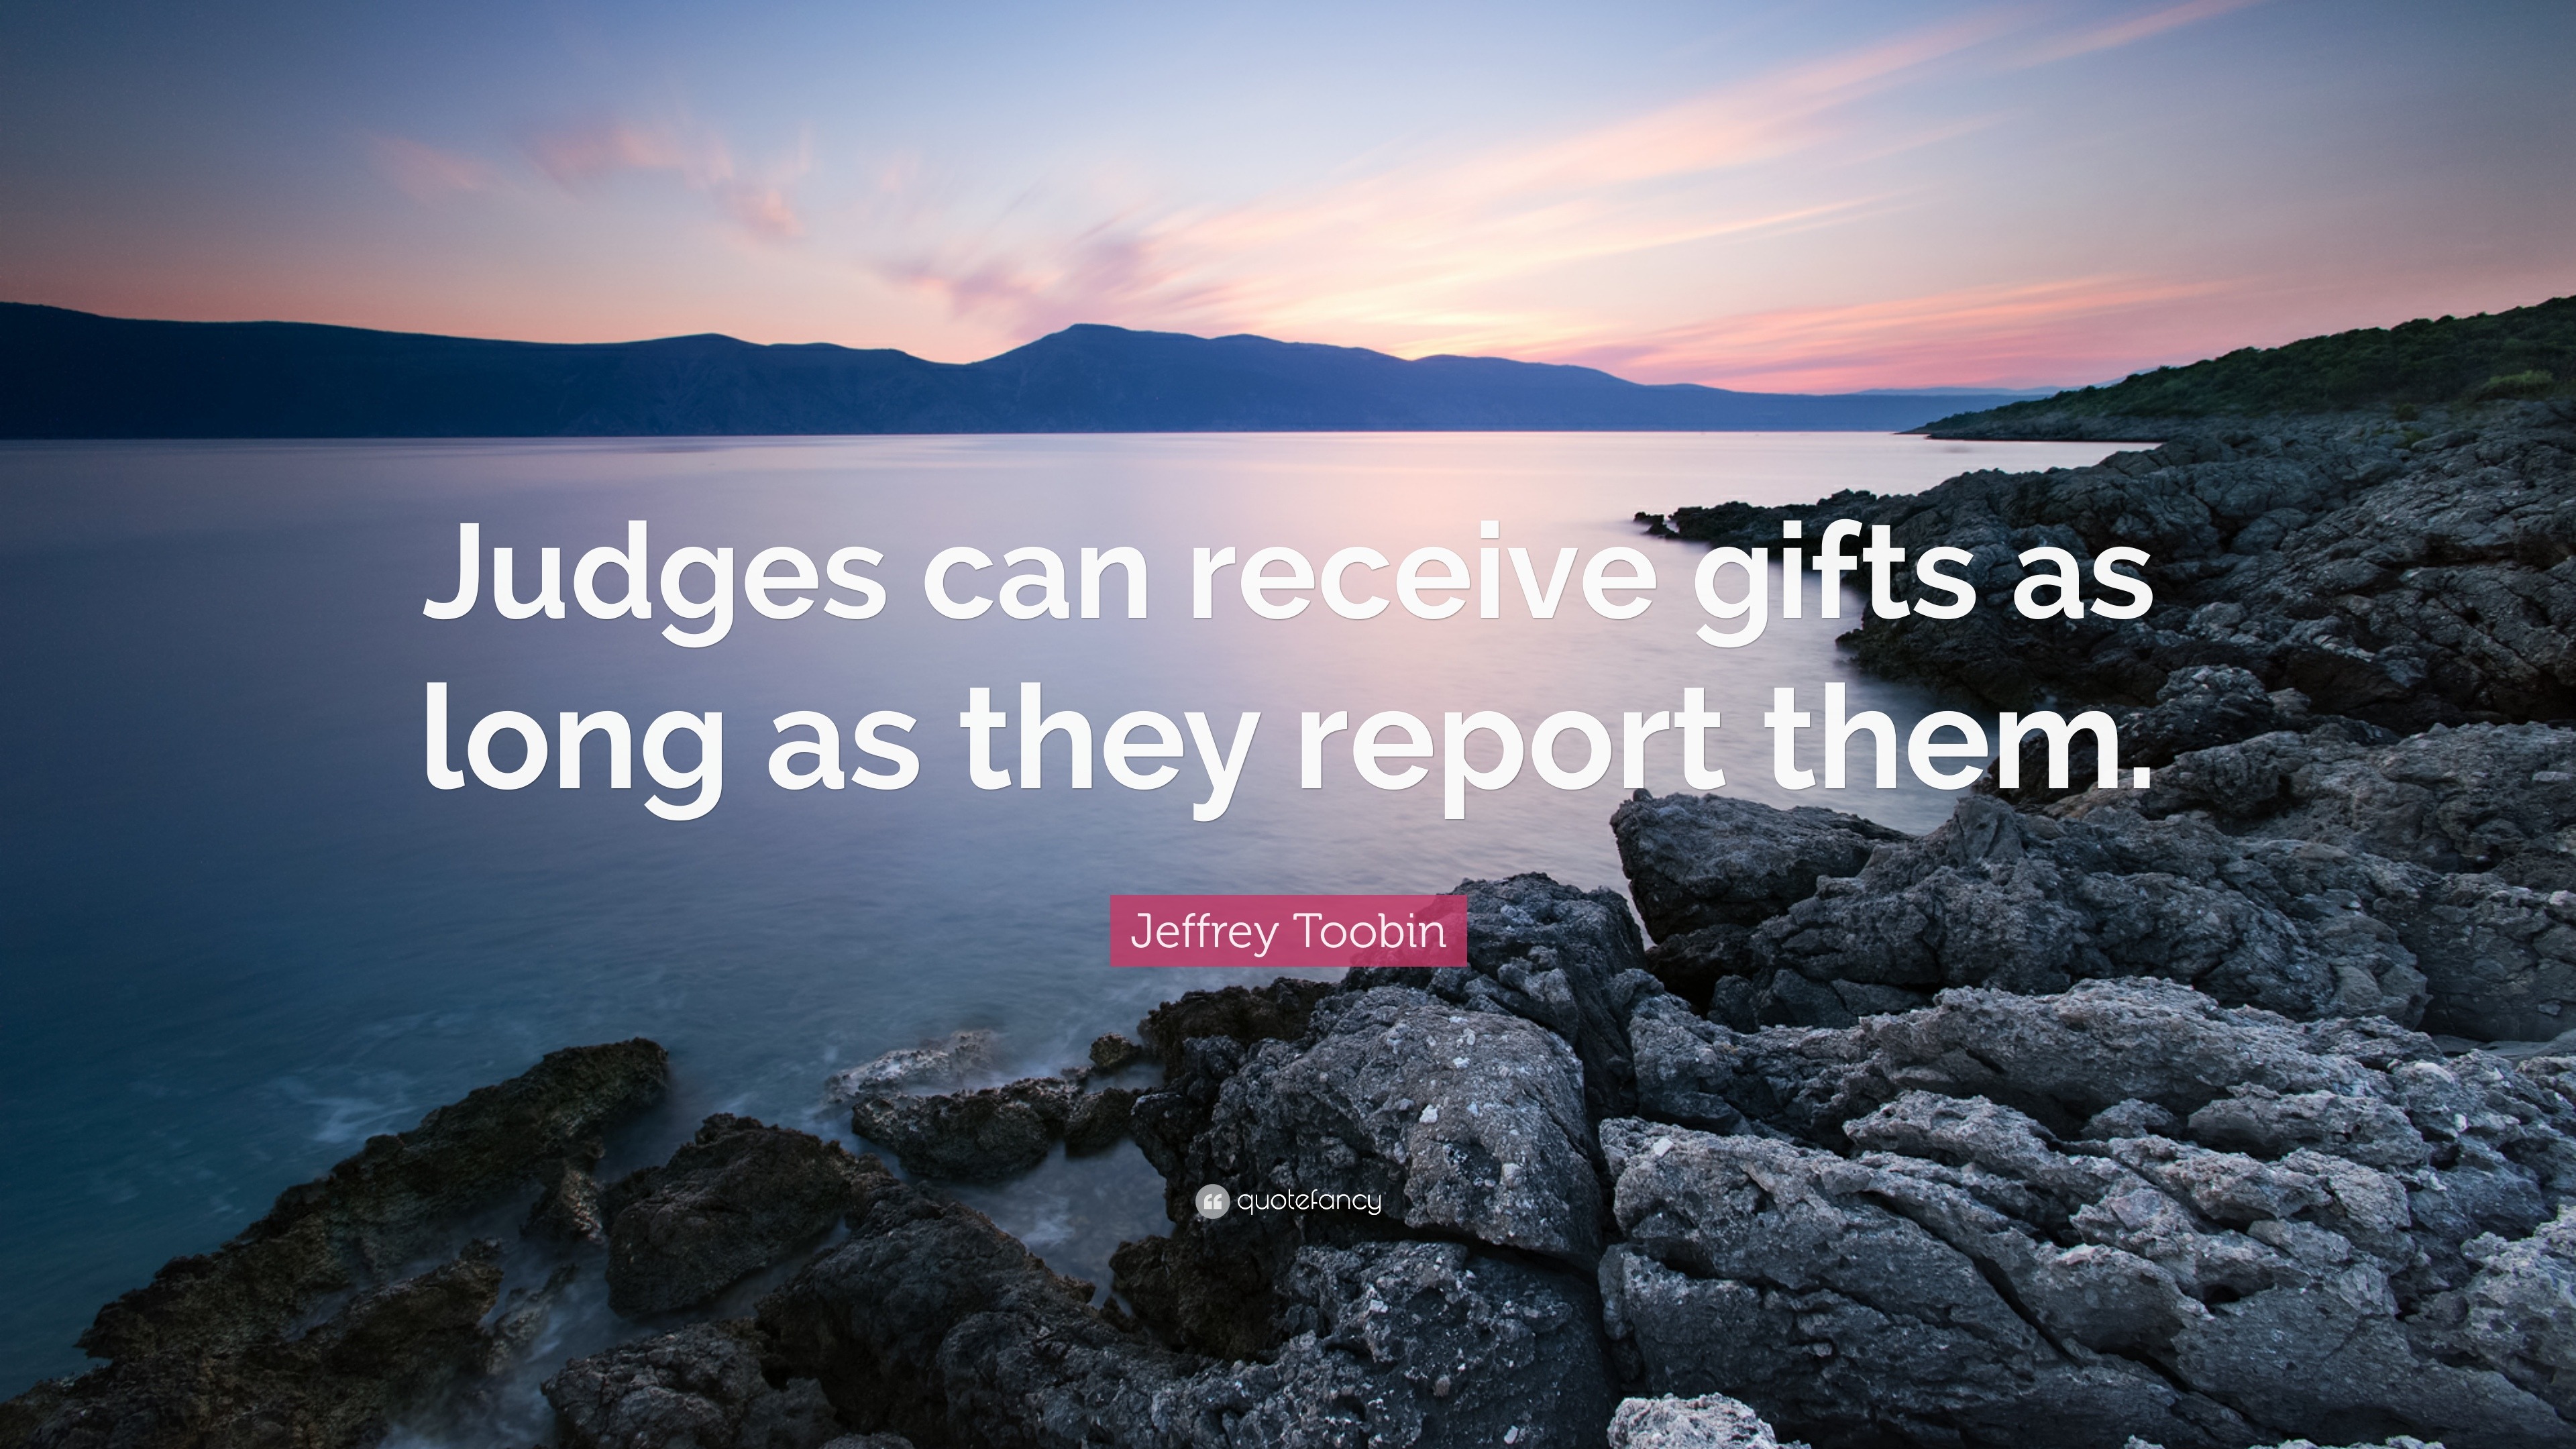 Jeffrey Toobin Quote: “Judges can receive gifts as long as they report  them.”